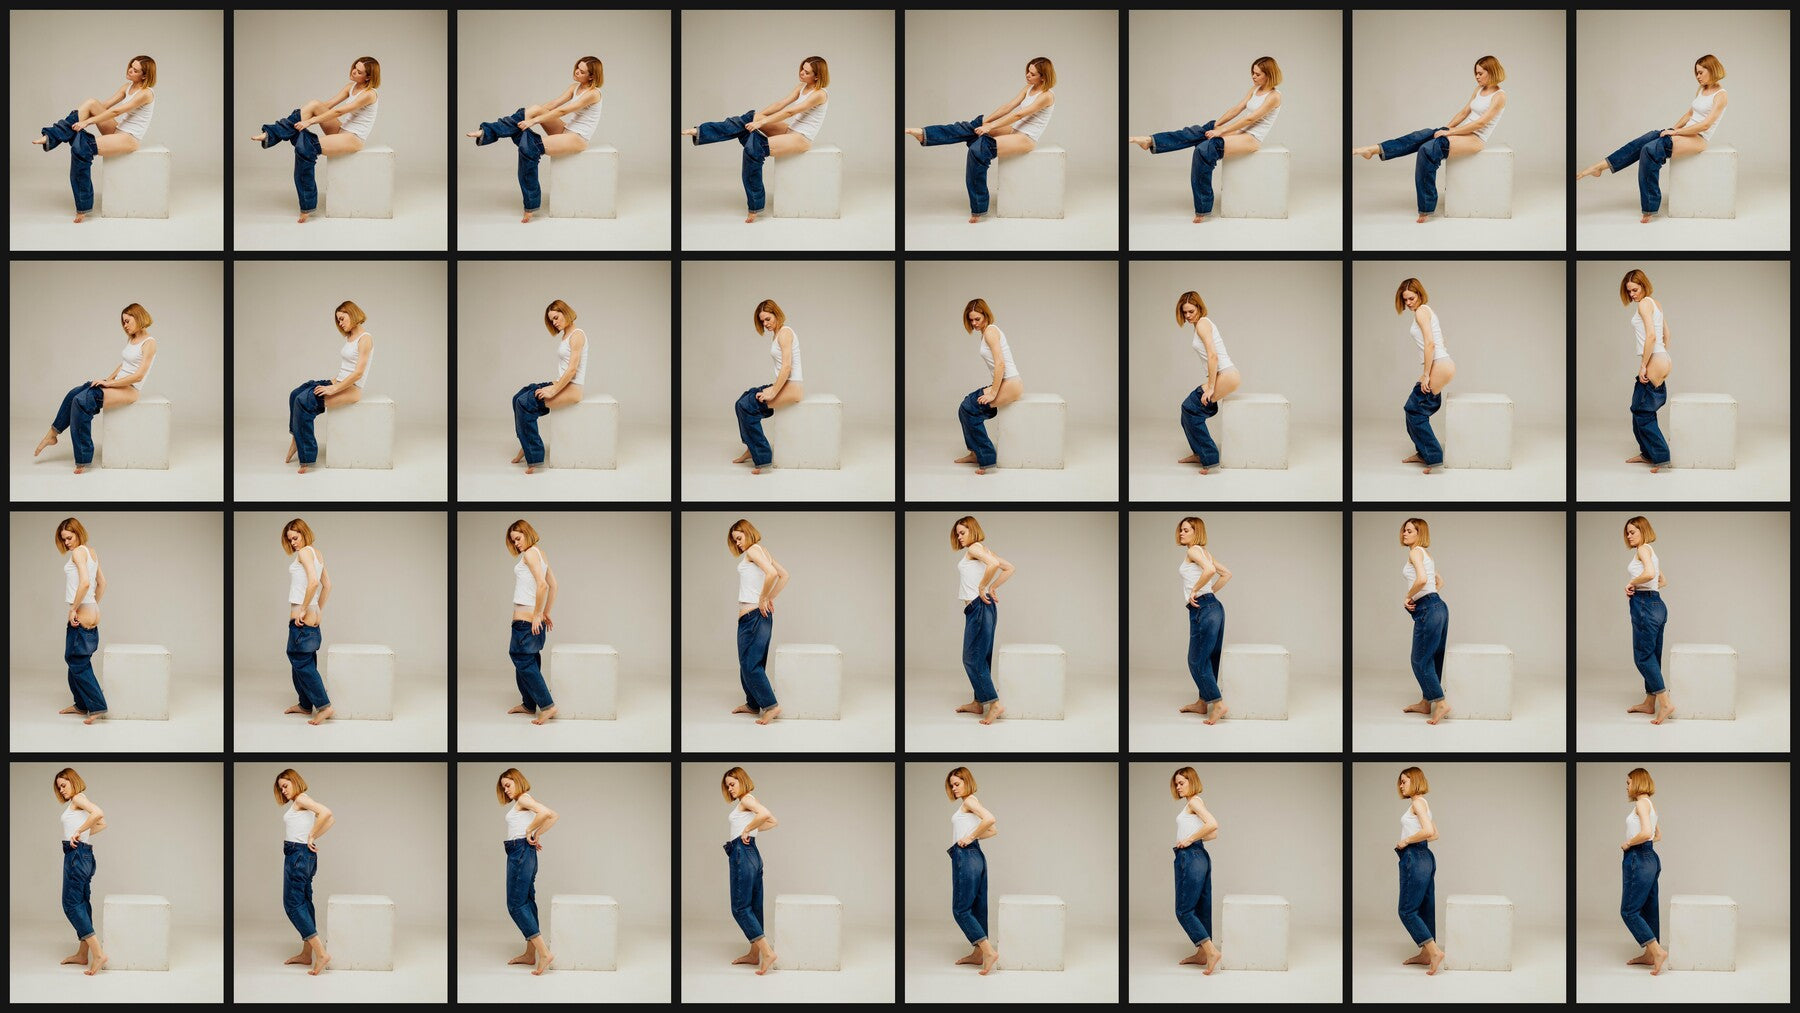 700+ Reference Photos - Different Clothes ( Sequential Movement )